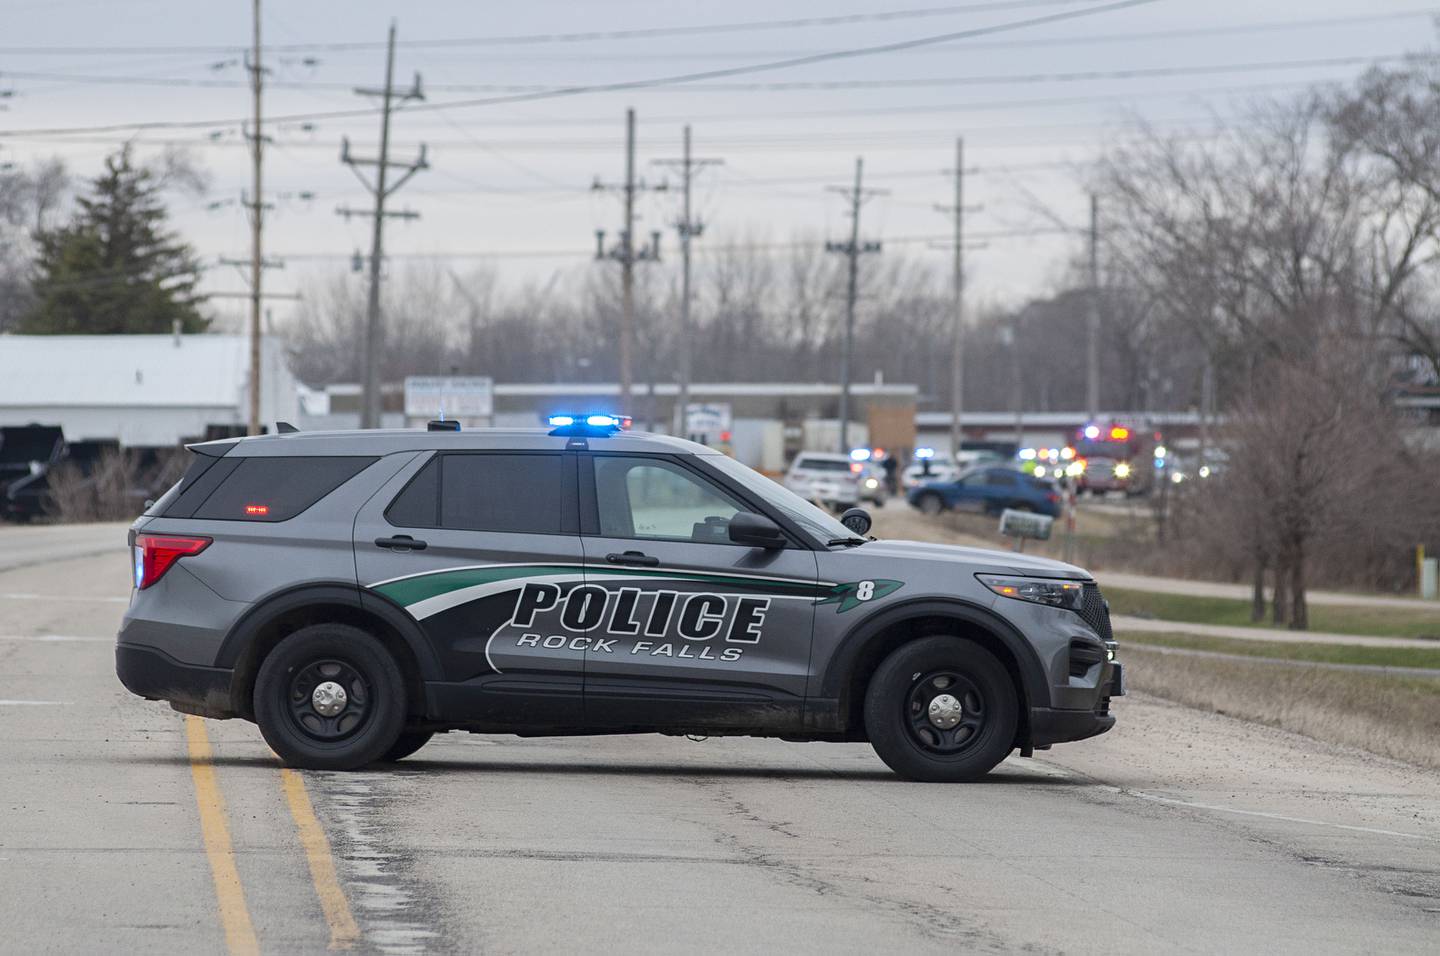 Traffic on east Route 30 in Rock Falls was blocked off Tuesday, March 29 2022 after an accident that proved fatal to two men. Rock Falls Police identified the driver of a Mercedes who led Sterling and Rock Falls police on chases through both towns Tuesday afternoon and crashed head-on into a pickup truck and killed its driver.